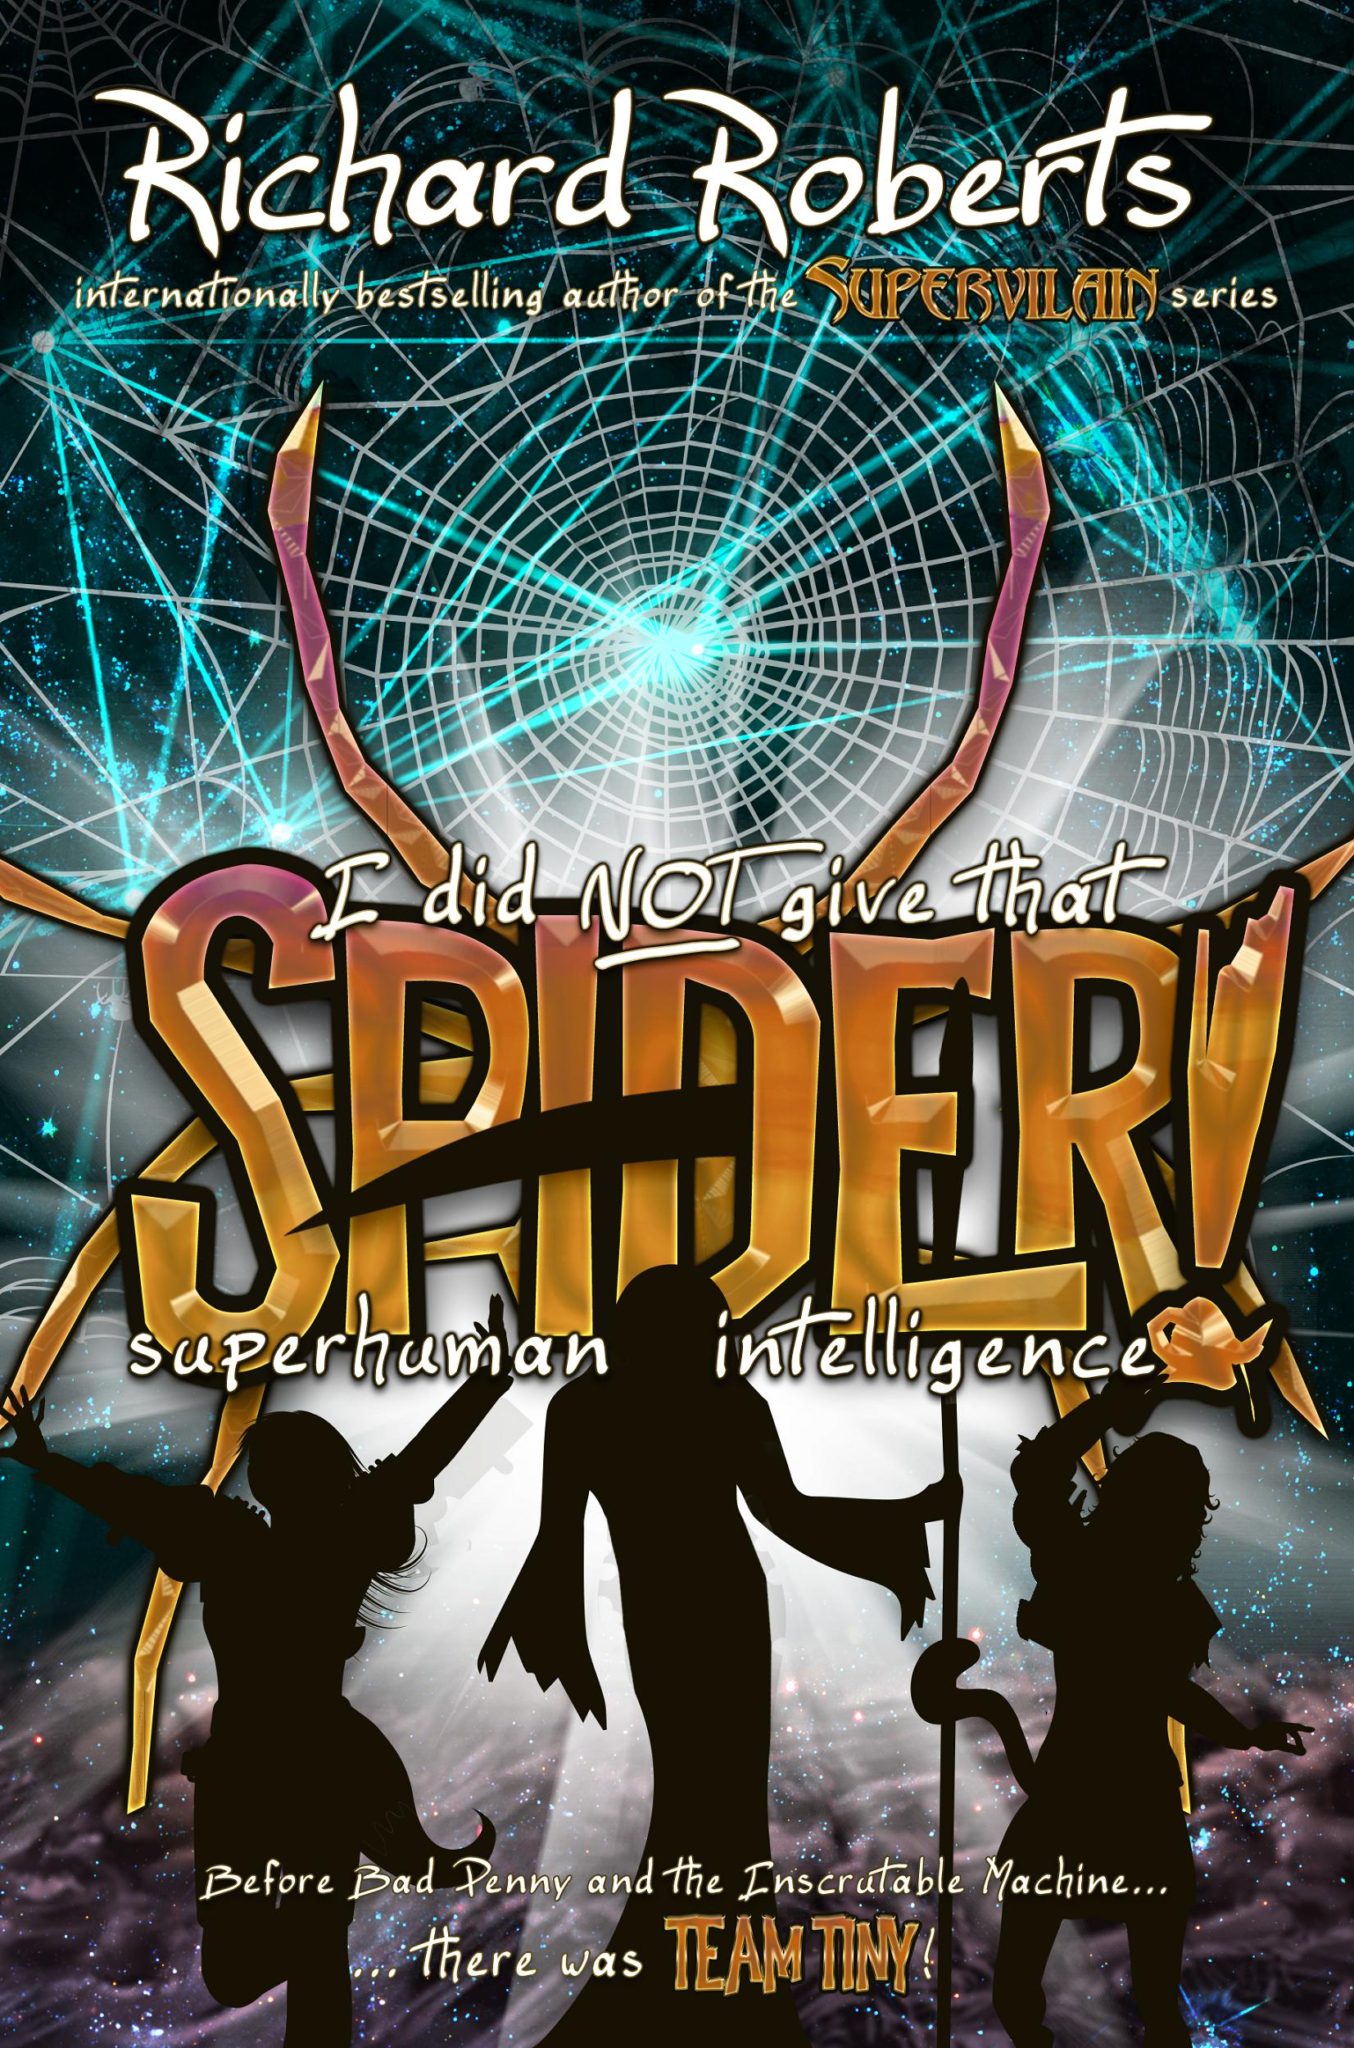 FREE: I Did NOT Give That Spider Superhuman Intelligence! by Richard Roberts